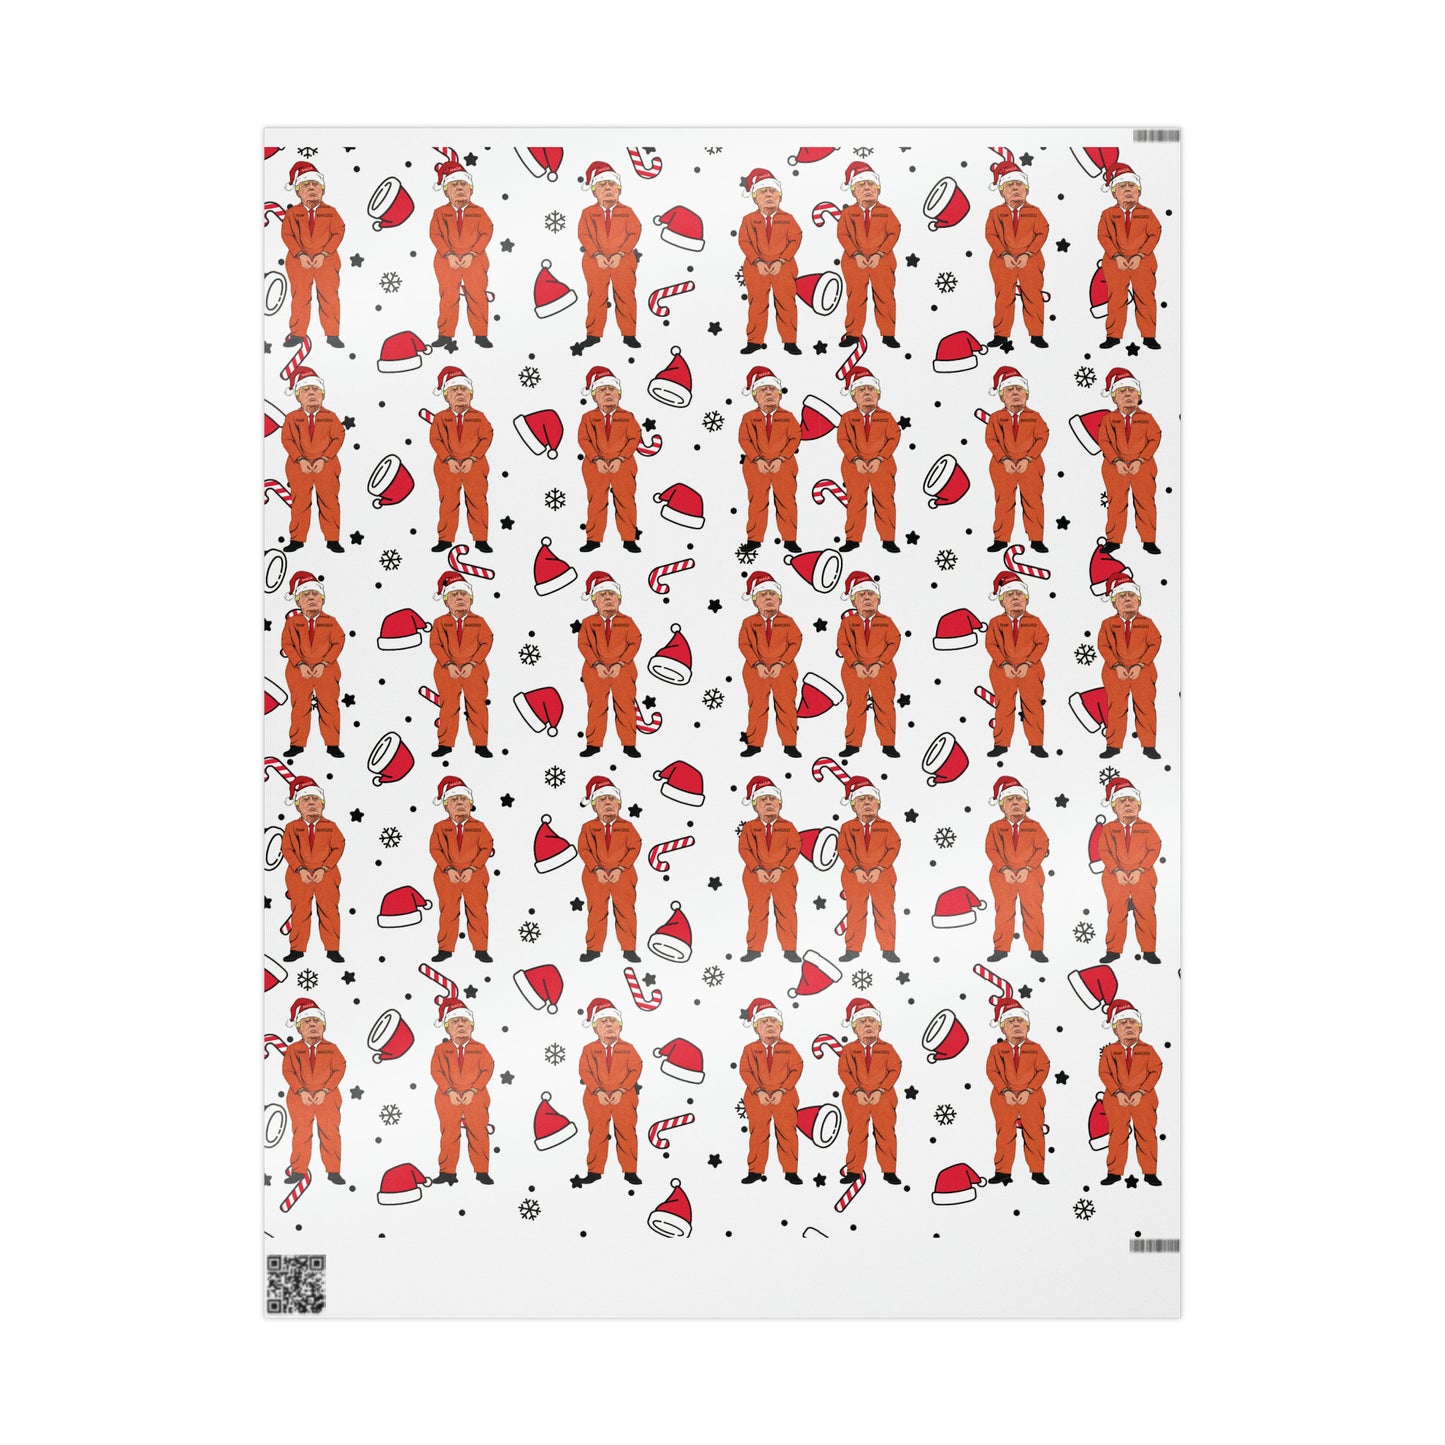 Funny Trump Orange Prison Suit Wrapping Paper for Gifts - Pro Biden Christmas Gift Wrap